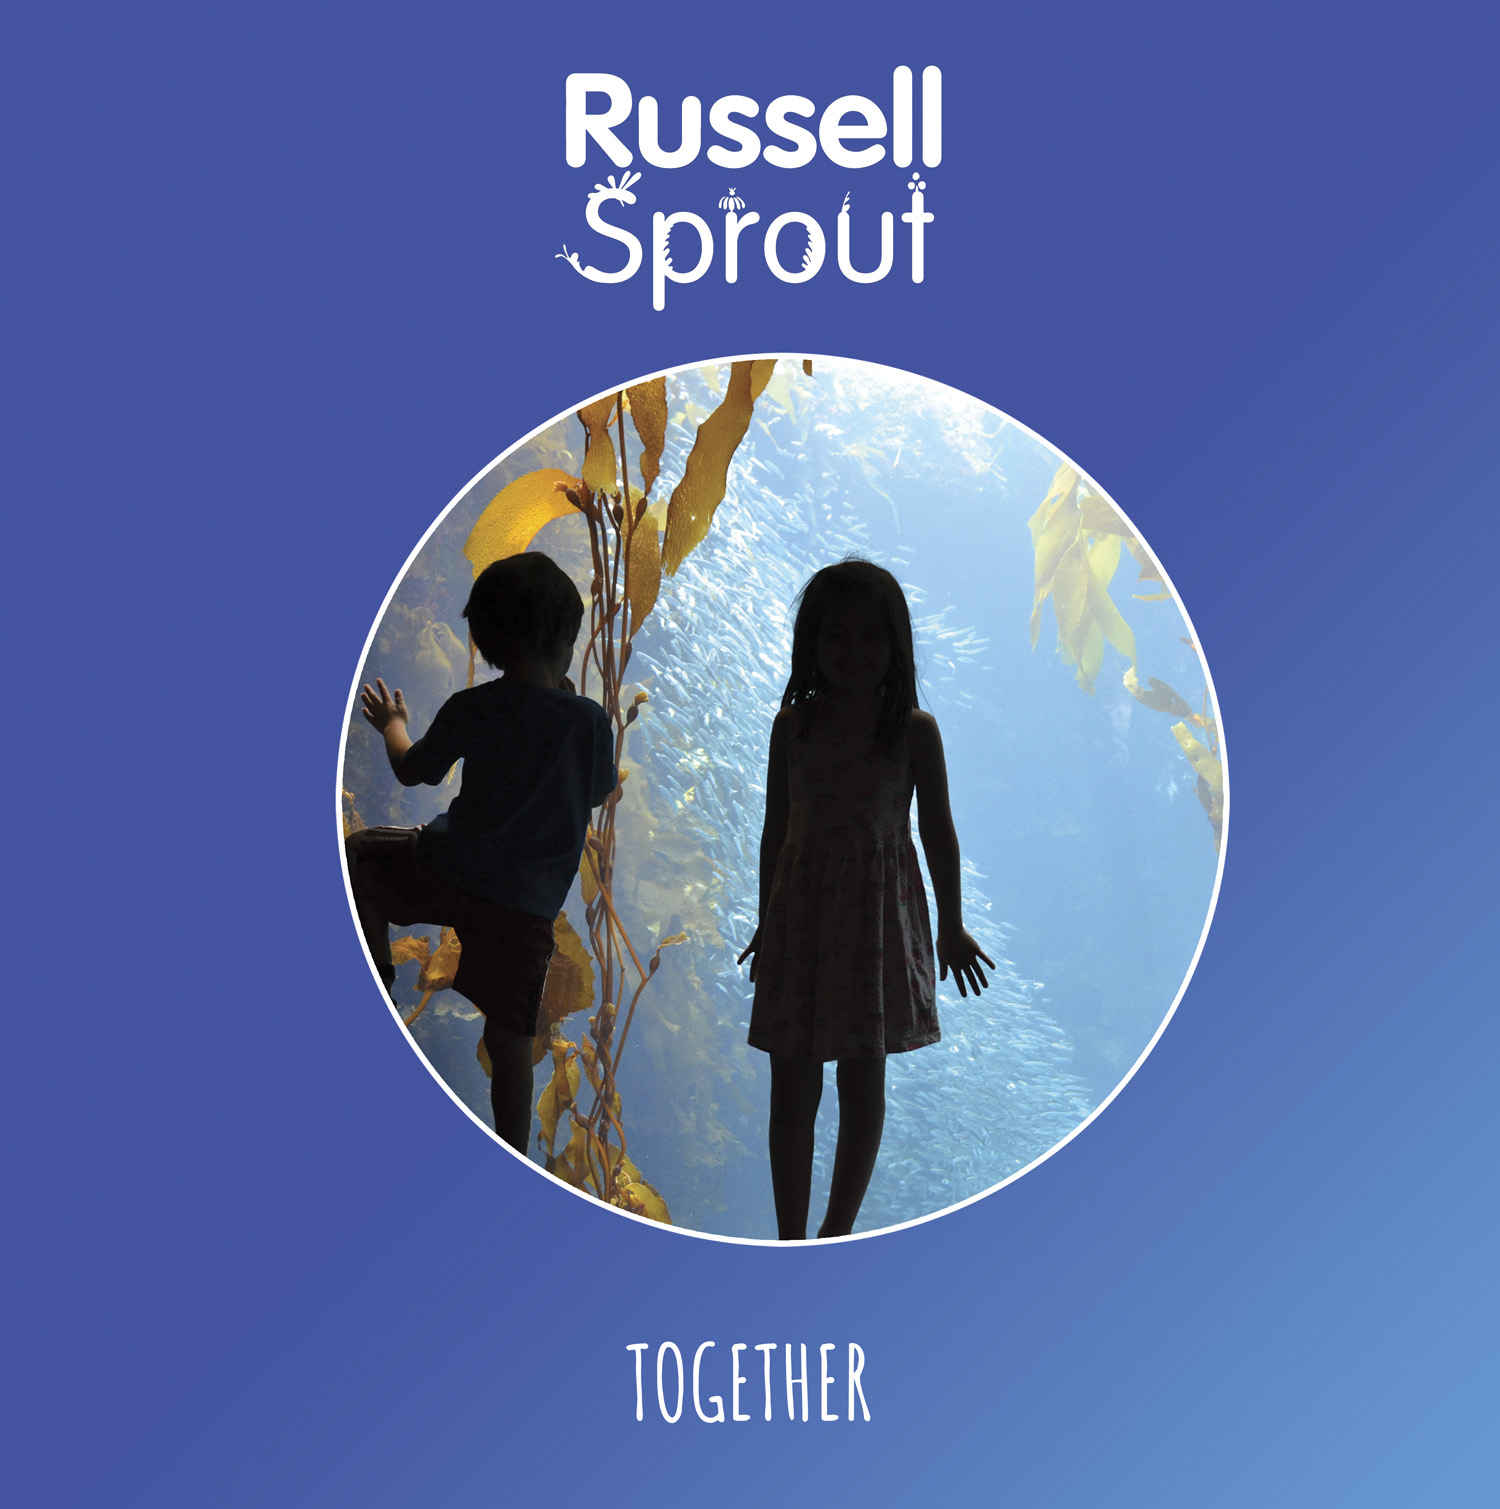 Russell Sprout